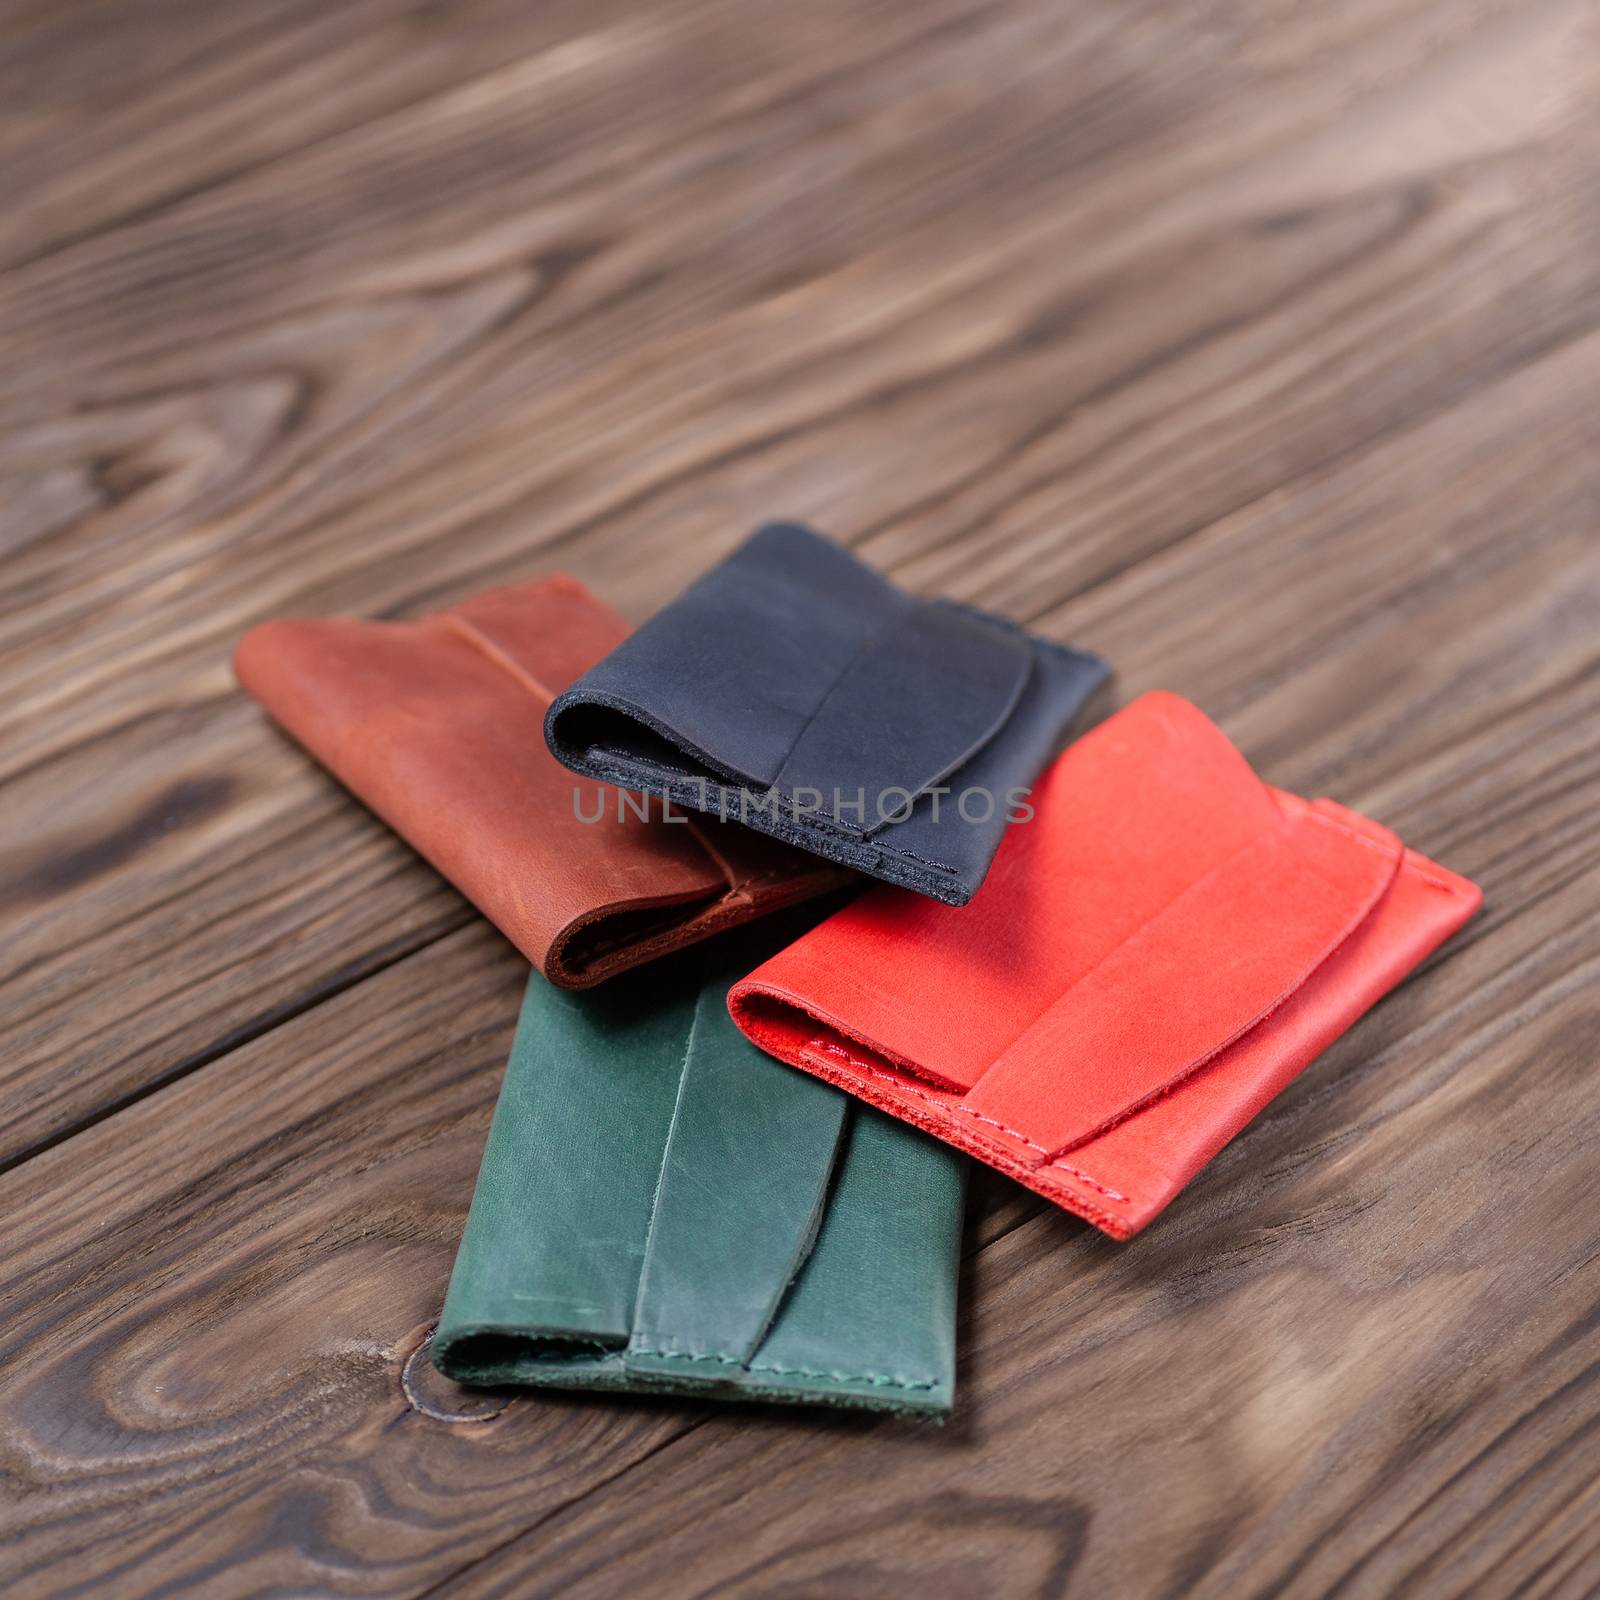 Flat lay photo of four different colour handmade leather one pocket cardholders.  Red, black, ginger and green colors. Stock photo on wooden background. 